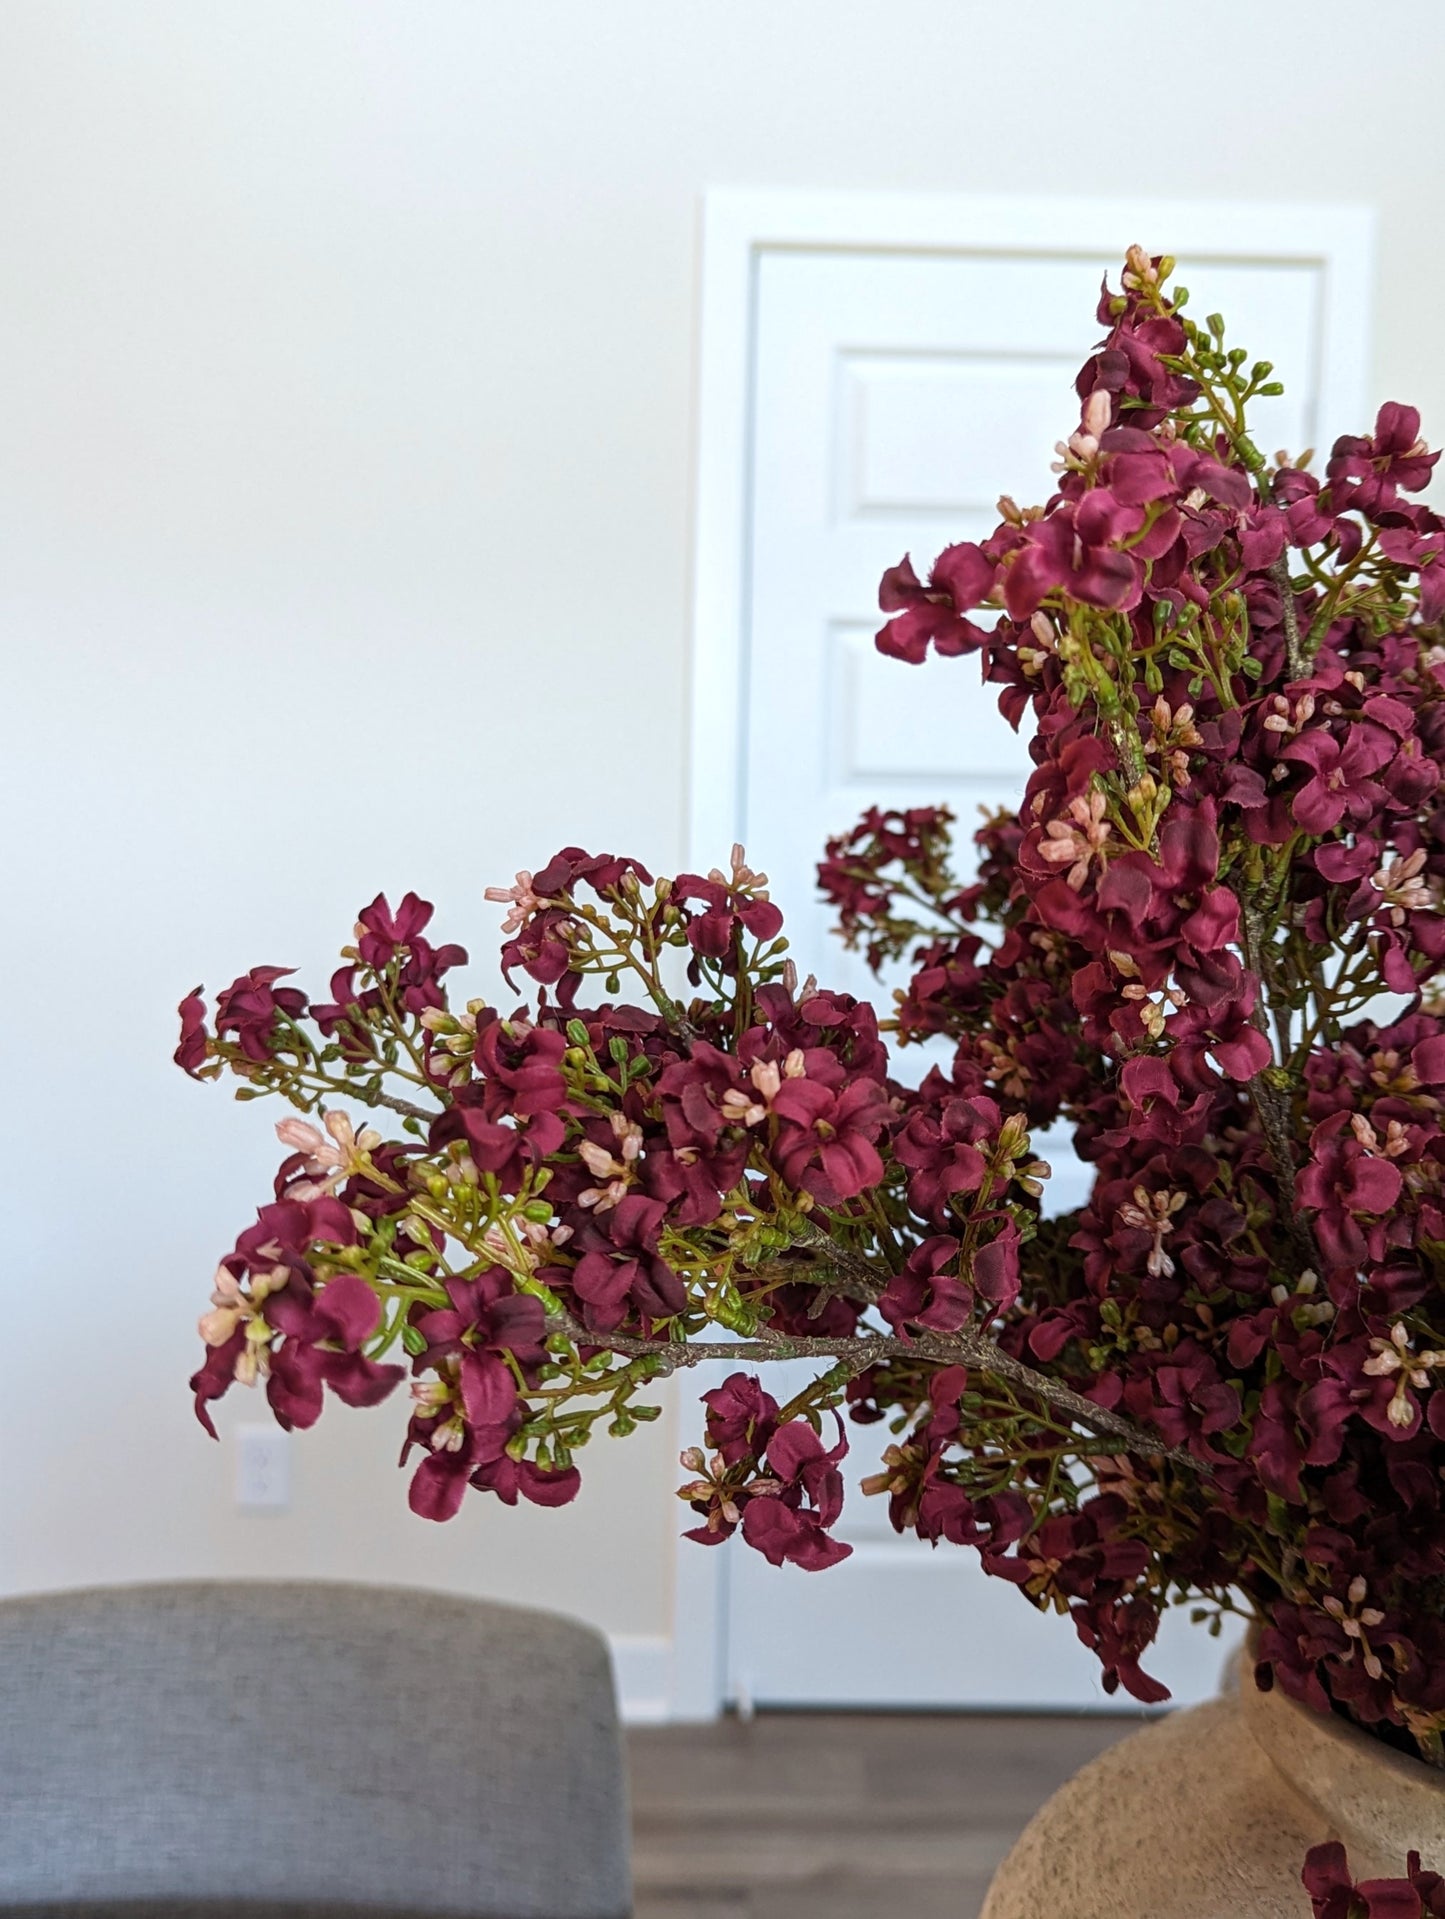 Artificial dark pink burgundy fall stem with light pink accents and realistic branch bouquet in lifestyle dining room setting.